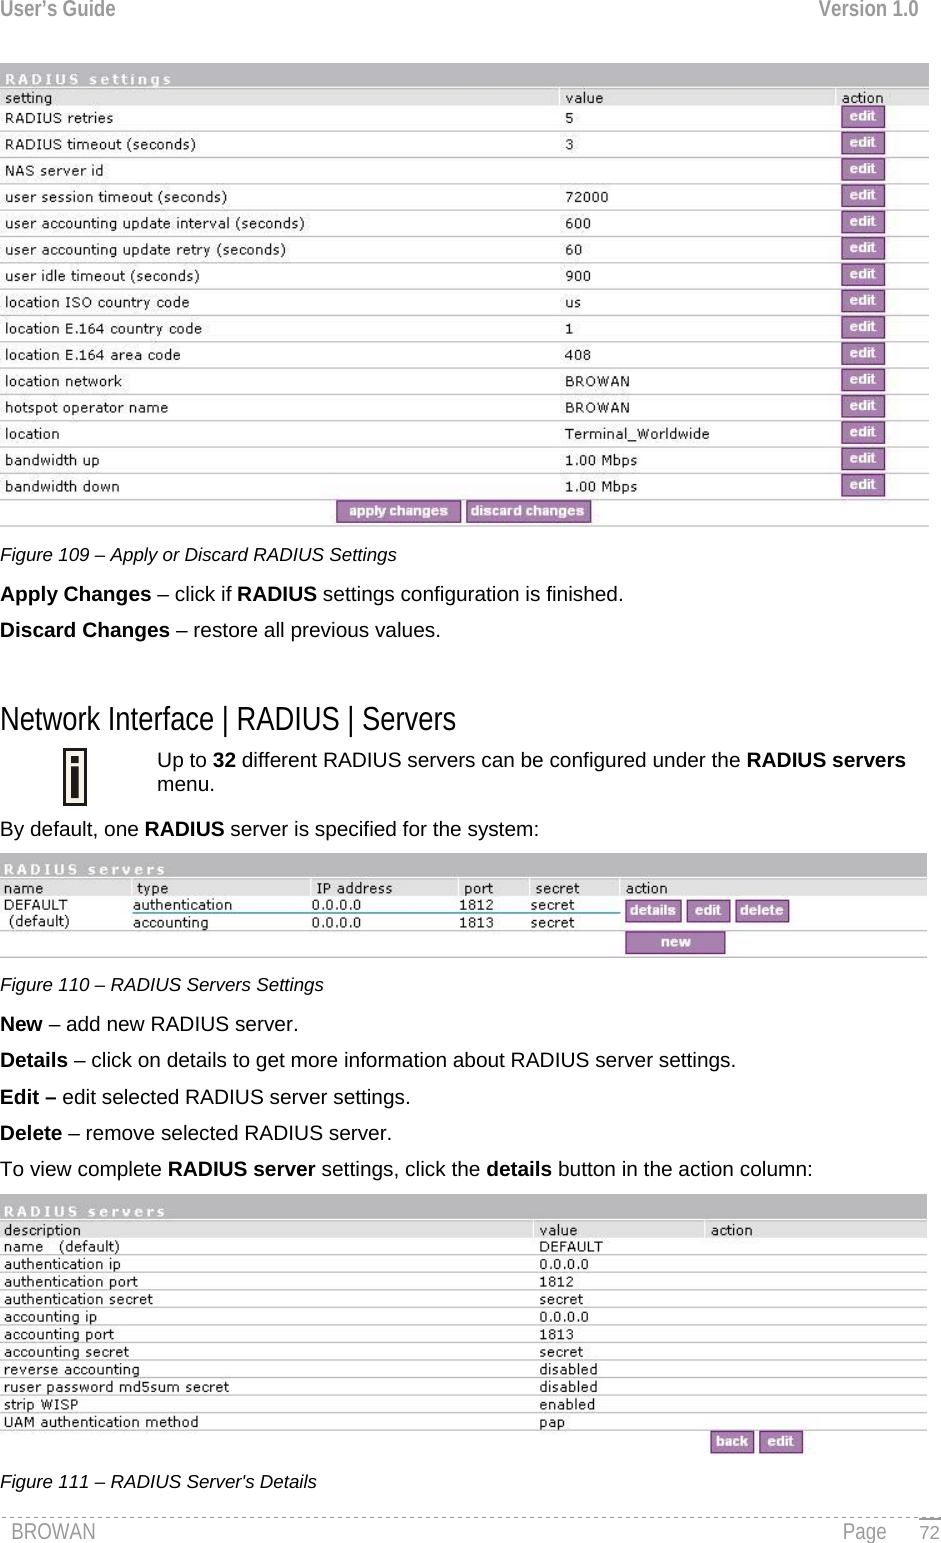 User’s Guide  Version 1.0   Figure 109 – Apply or Discard RADIUS Settings Apply Changes – click if RADIUS settings configuration is finished. Discard Changes – restore all previous values.  Network Interface | RADIUS | Servers Up to 32 different RADIUS servers can be configured under the RADIUS servers menu.  By default, one RADIUS server is specified for the system:  Figure 110 – RADIUS Servers Settings New – add new RADIUS server. Details – click on details to get more information about RADIUS server settings. Edit – edit selected RADIUS server settings. Delete – remove selected RADIUS server. To view complete RADIUS server settings, click the details button in the action column:  Figure 111 – RADIUS Server&apos;s Details BROWAN                                                                                                                                               Page   72